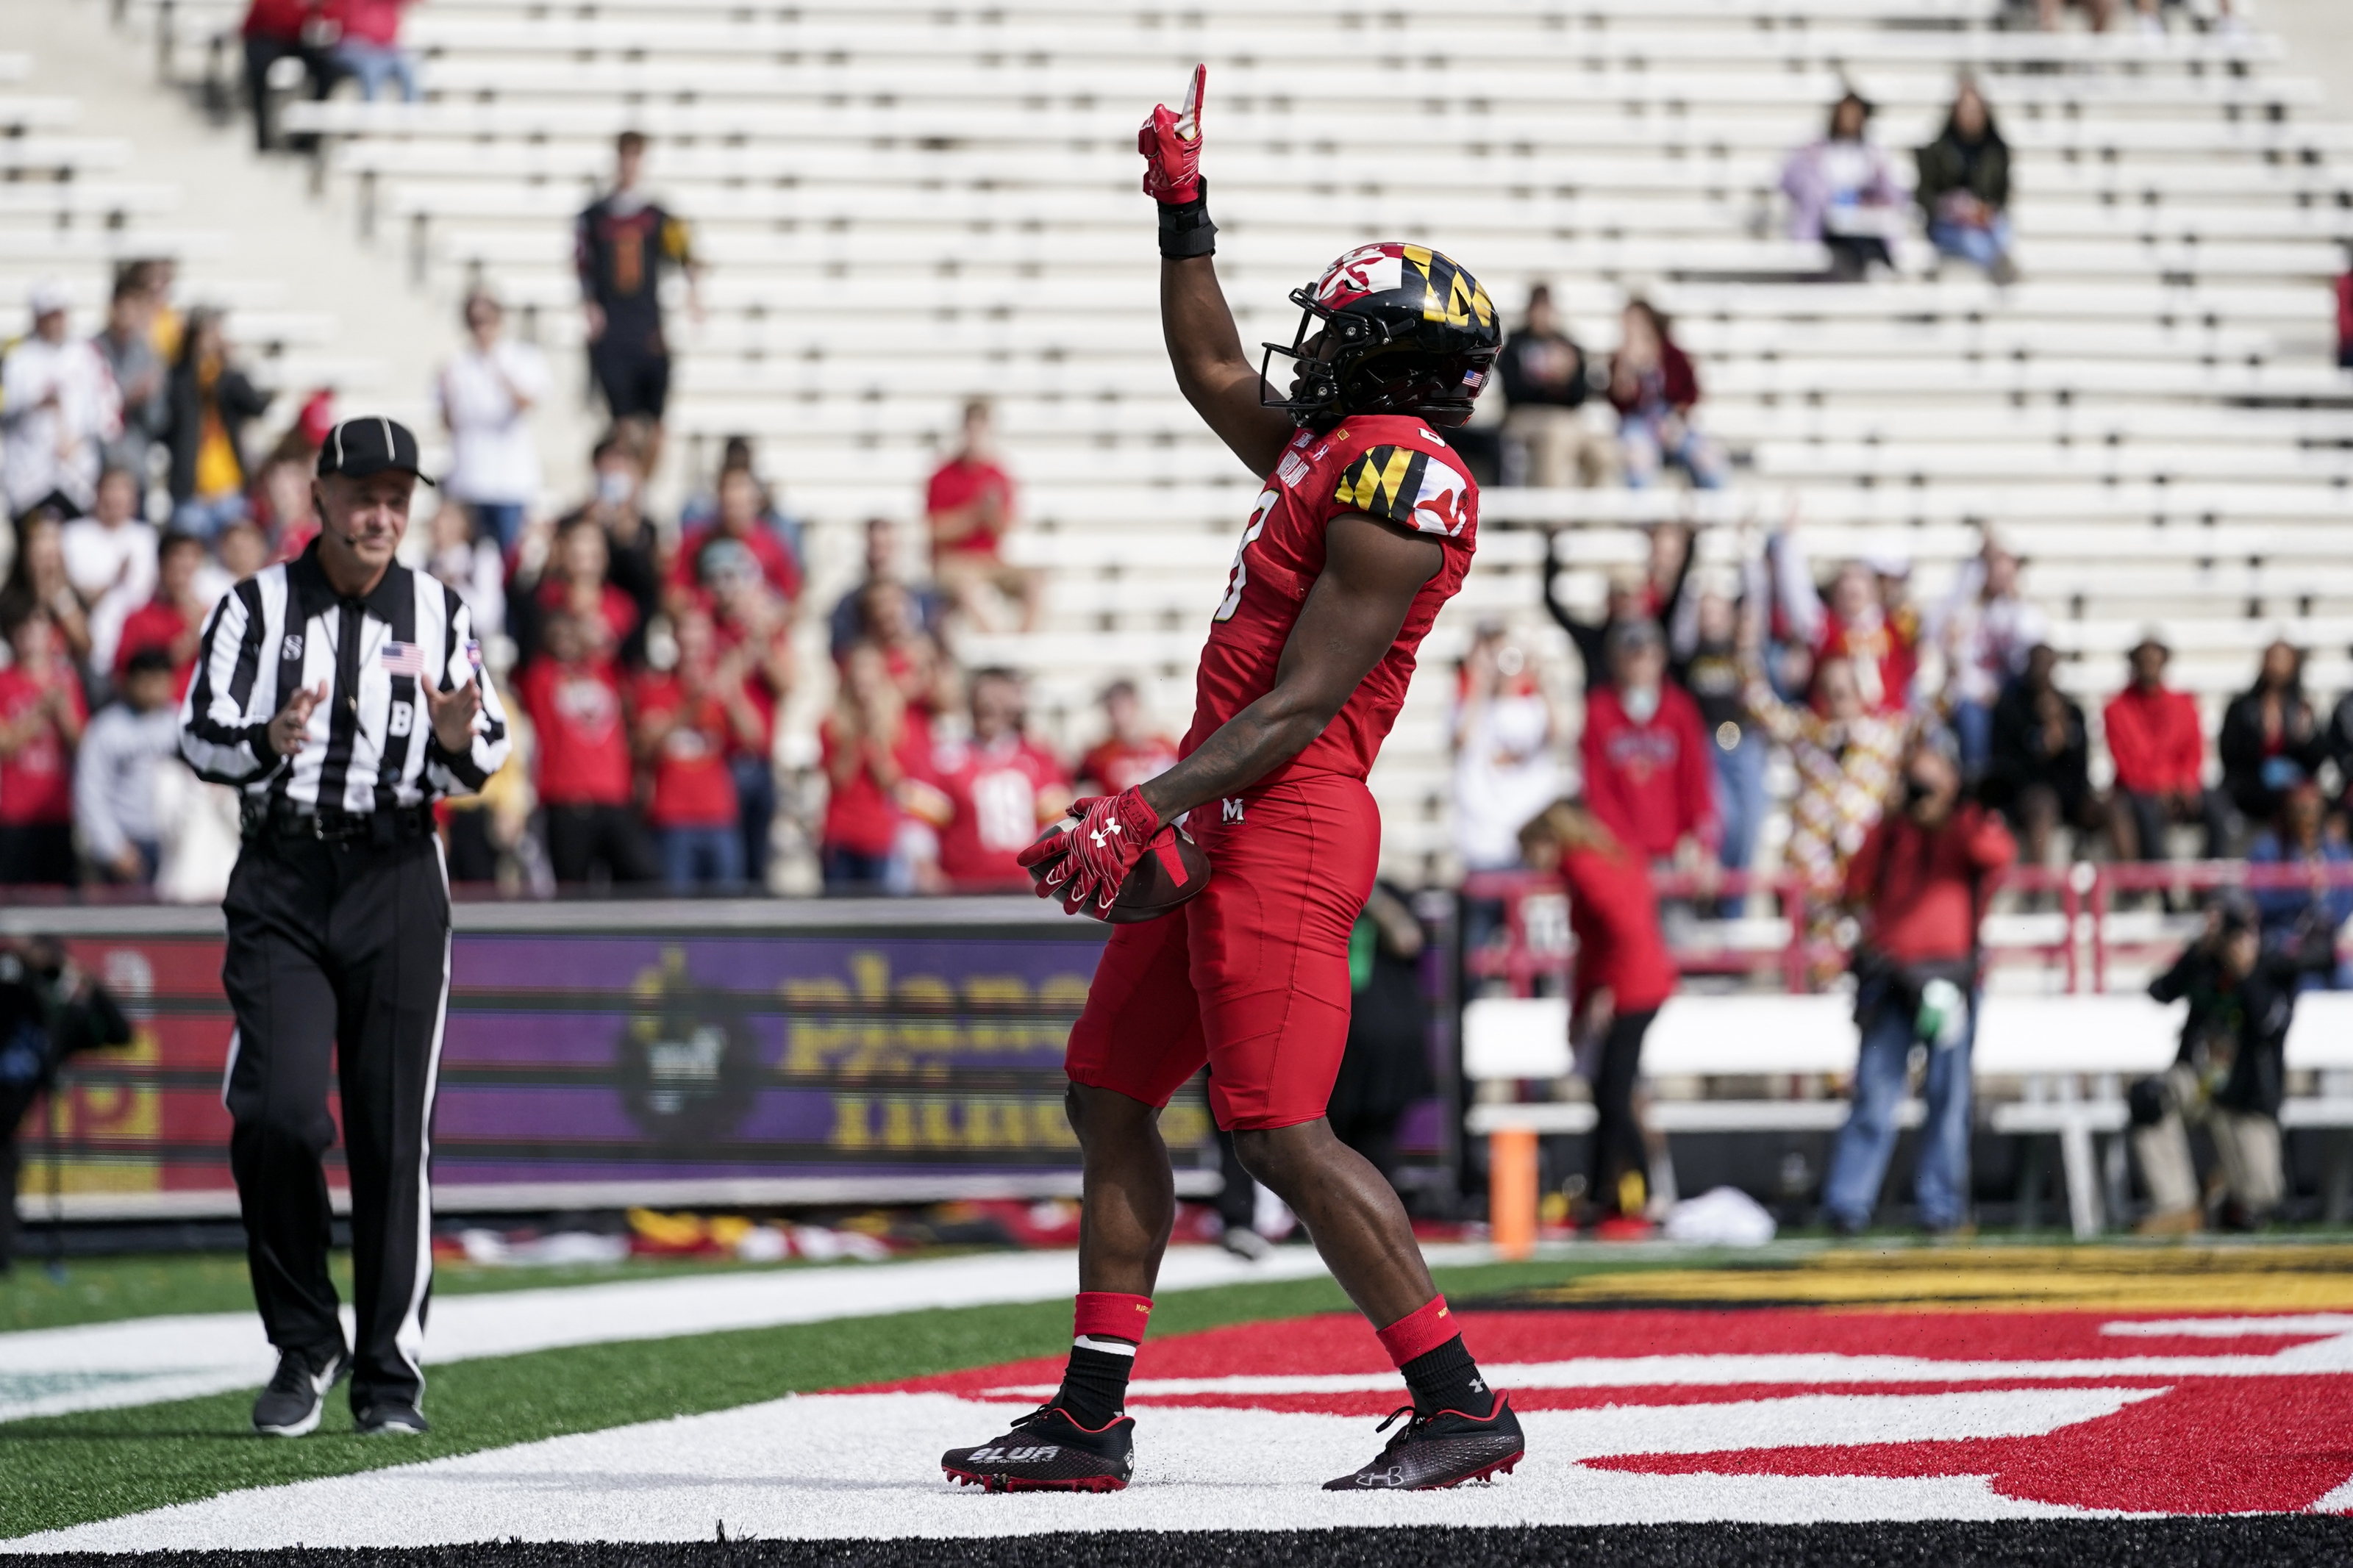 Maryland snaps skid with 38-35 victory over Indiana - WTOP News